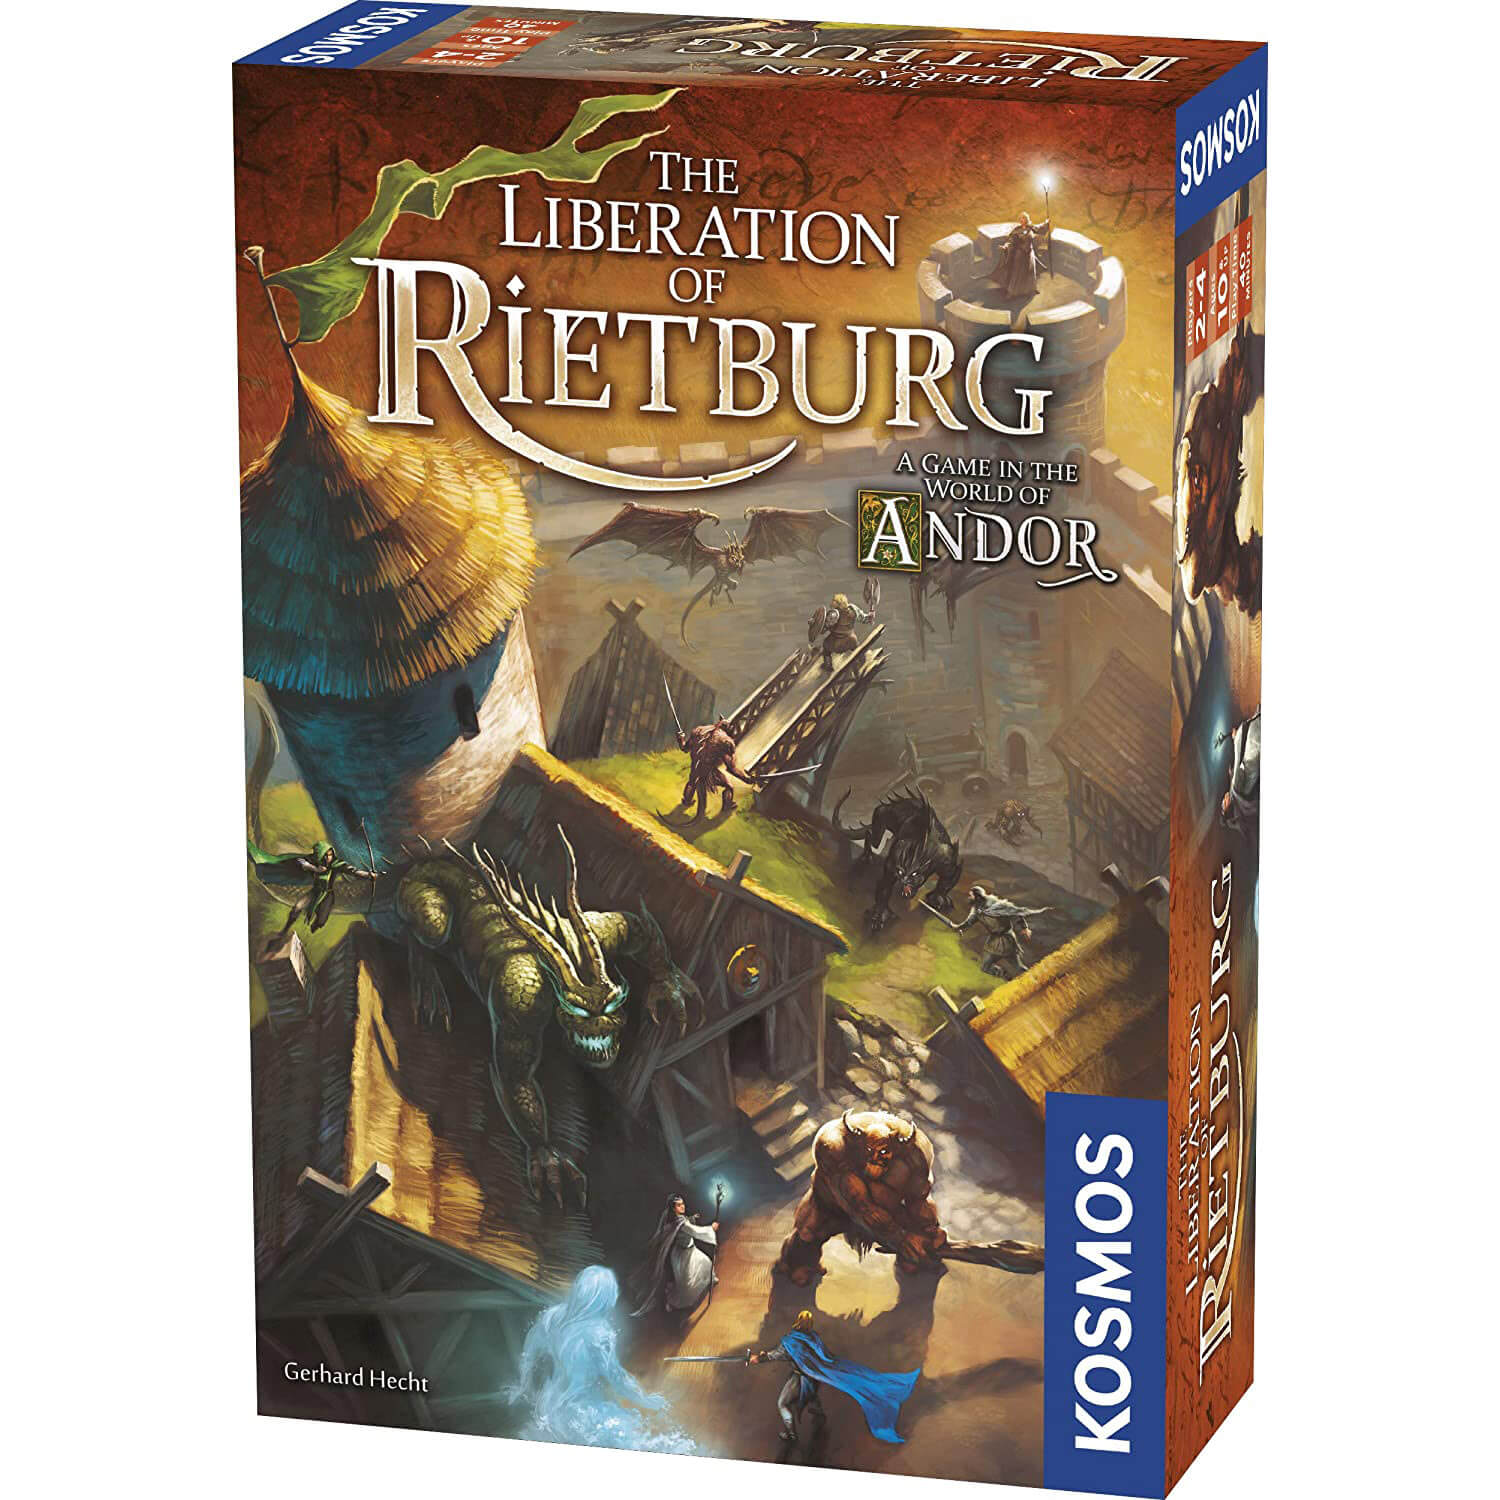 Thames and Kosmos Legends of Andor: The Liberation of Rietburg